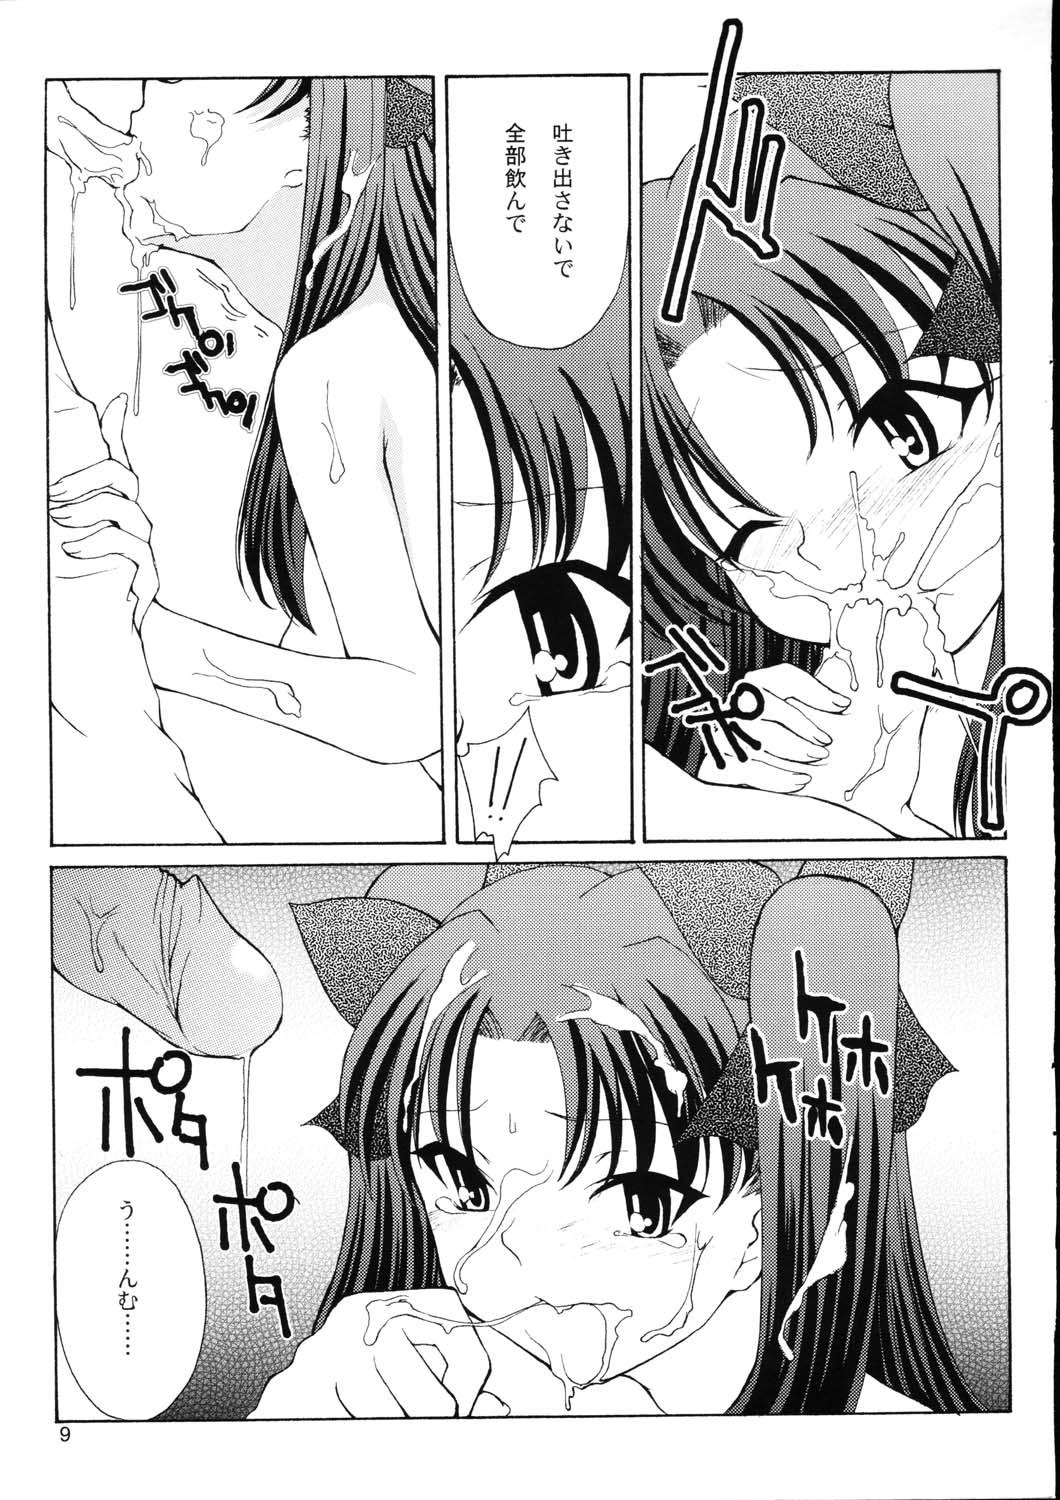 White Girl Previous Night - Fate stay night Gay Straight - Page 8